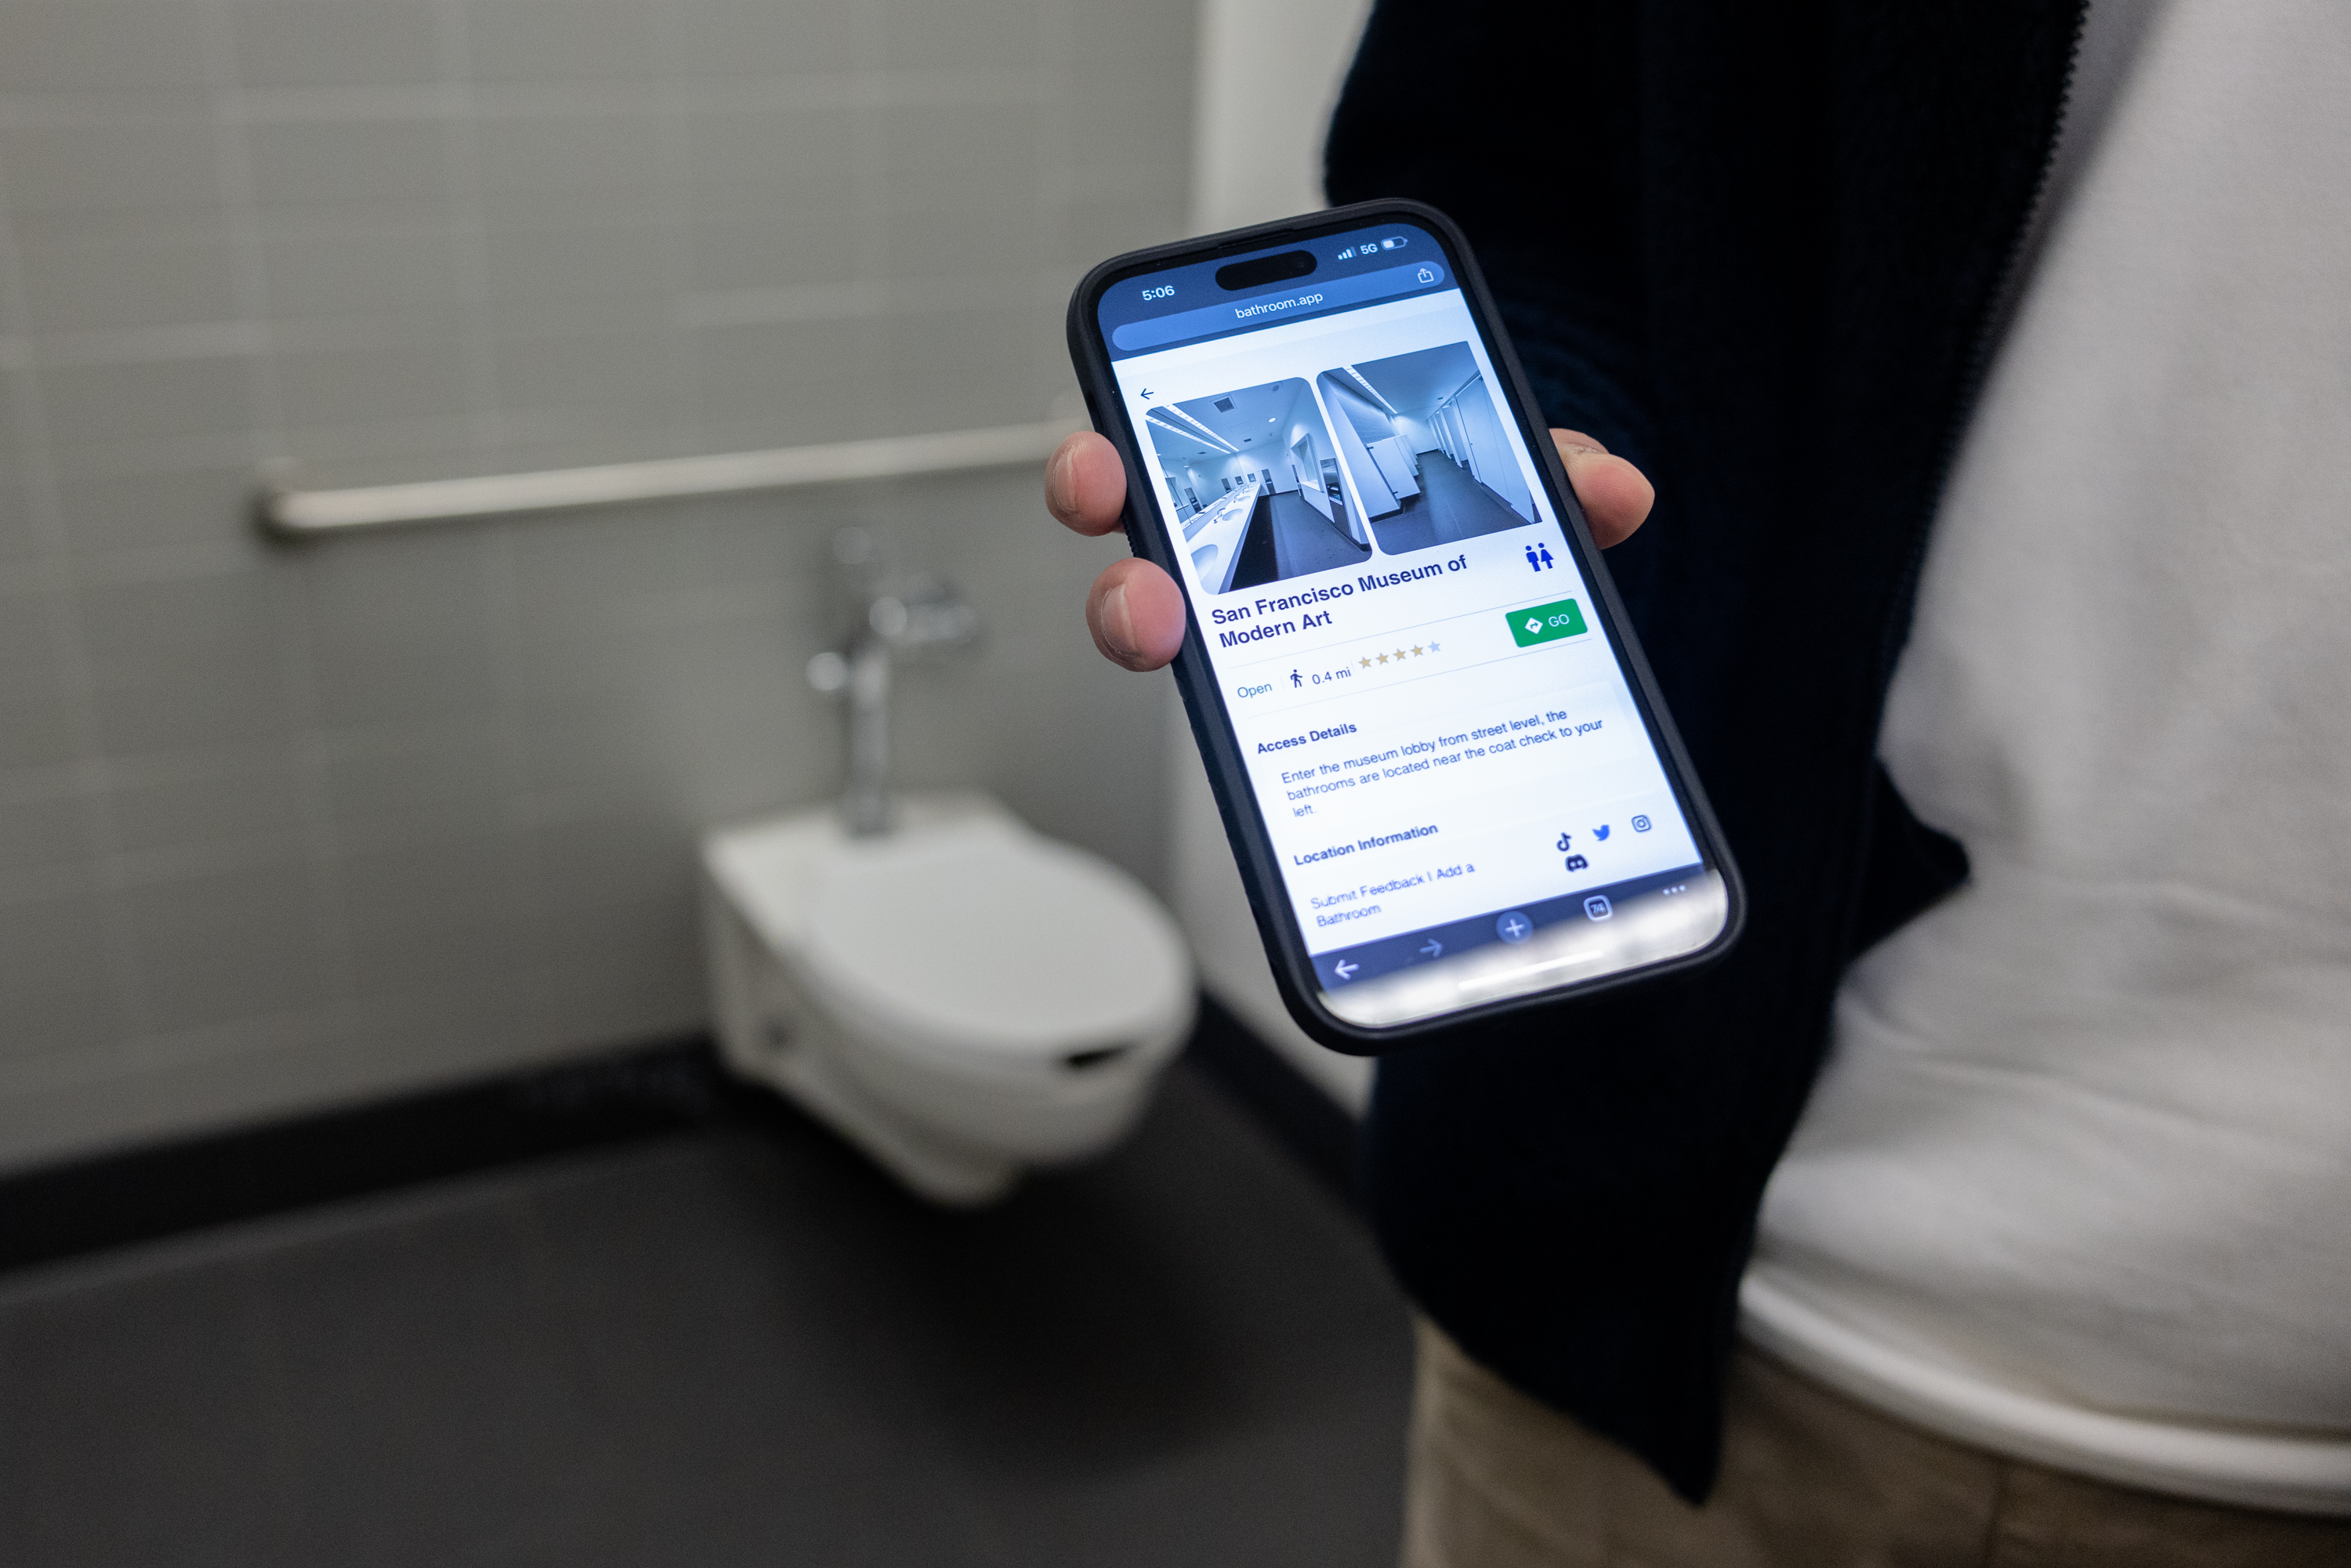 A phone shows a web browser featuring photos of a bathroom